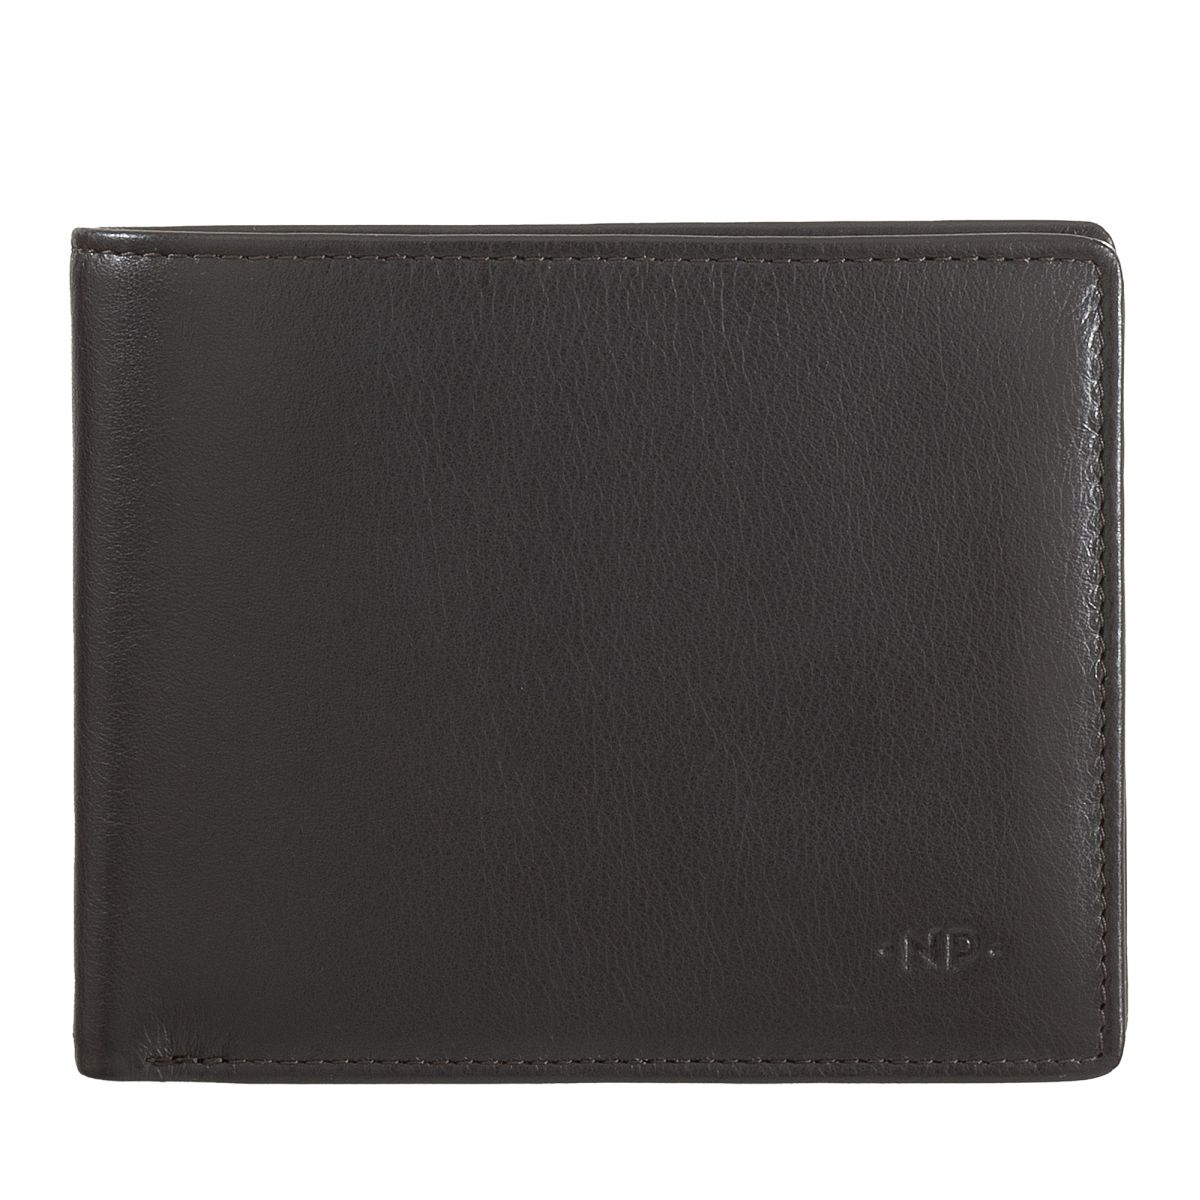 NUVOLA PELLE Slim Leather Wallet With Coin Pocket - Dark Brown